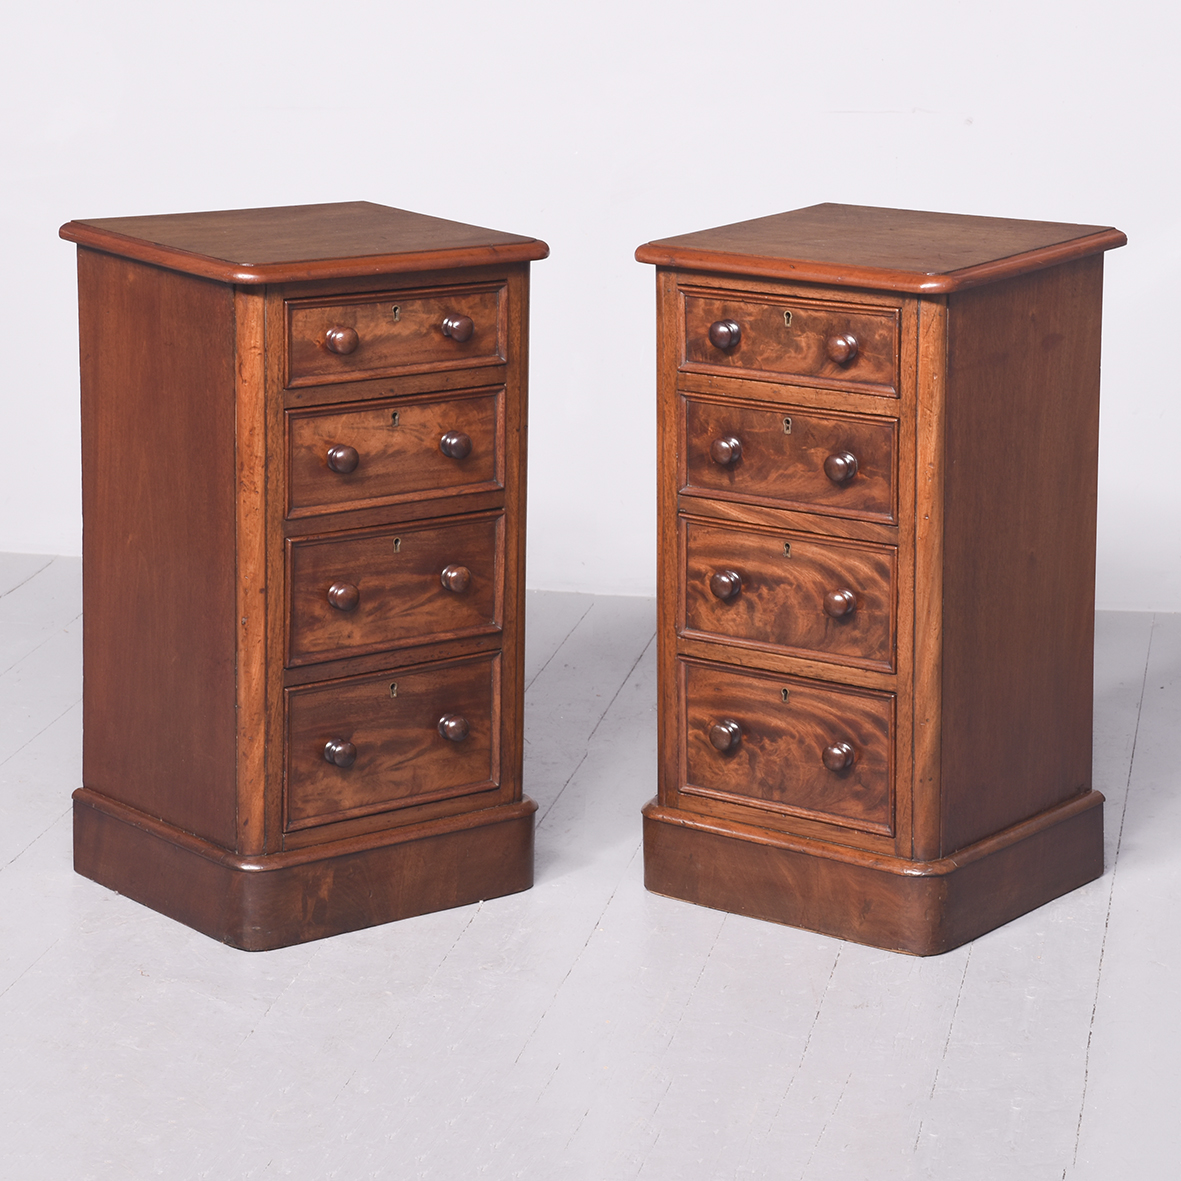 Pair of Small Victorian Figured Mahogany Chest of Drawers or Bedside Lockers bedside cabinet Antique Chest Of Drawers